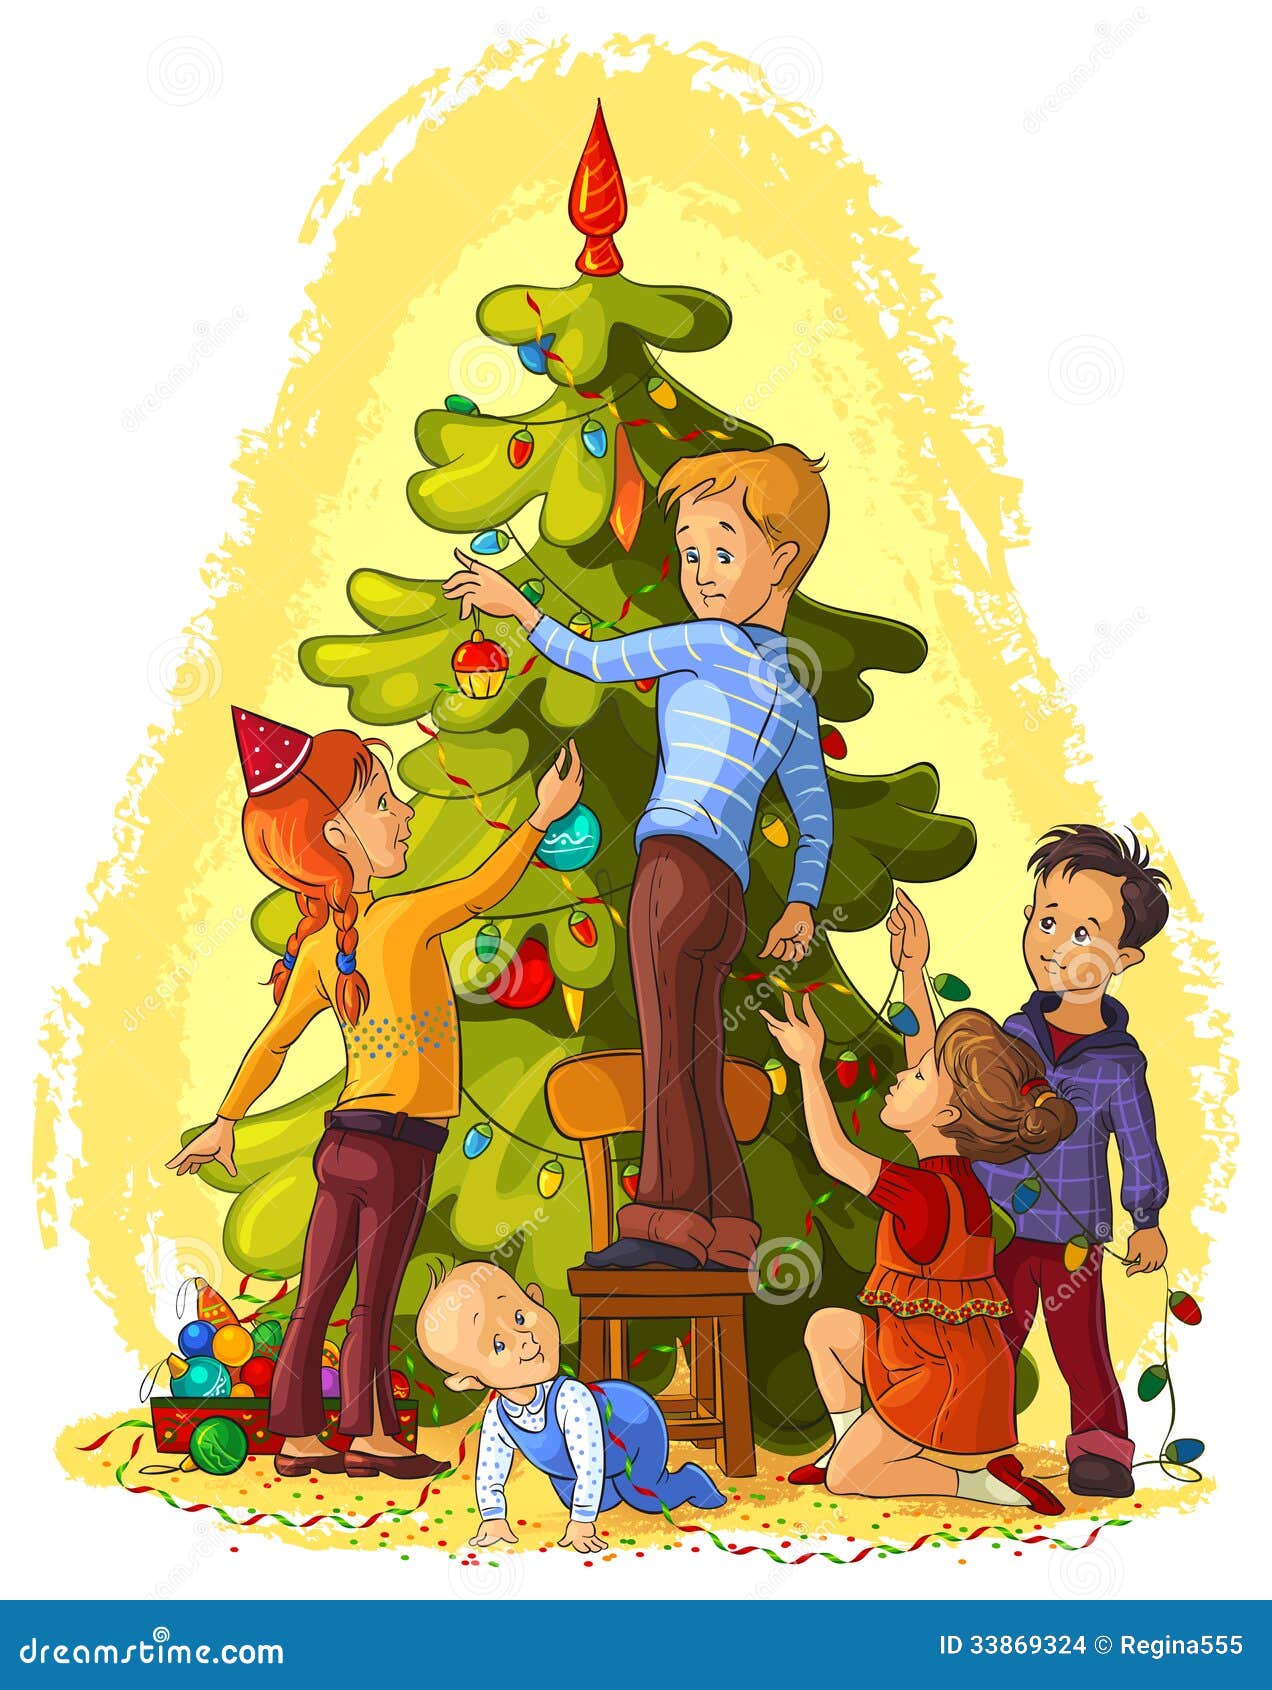 Kids Decorating a Christmas Tree Stock Vector - Illustration of